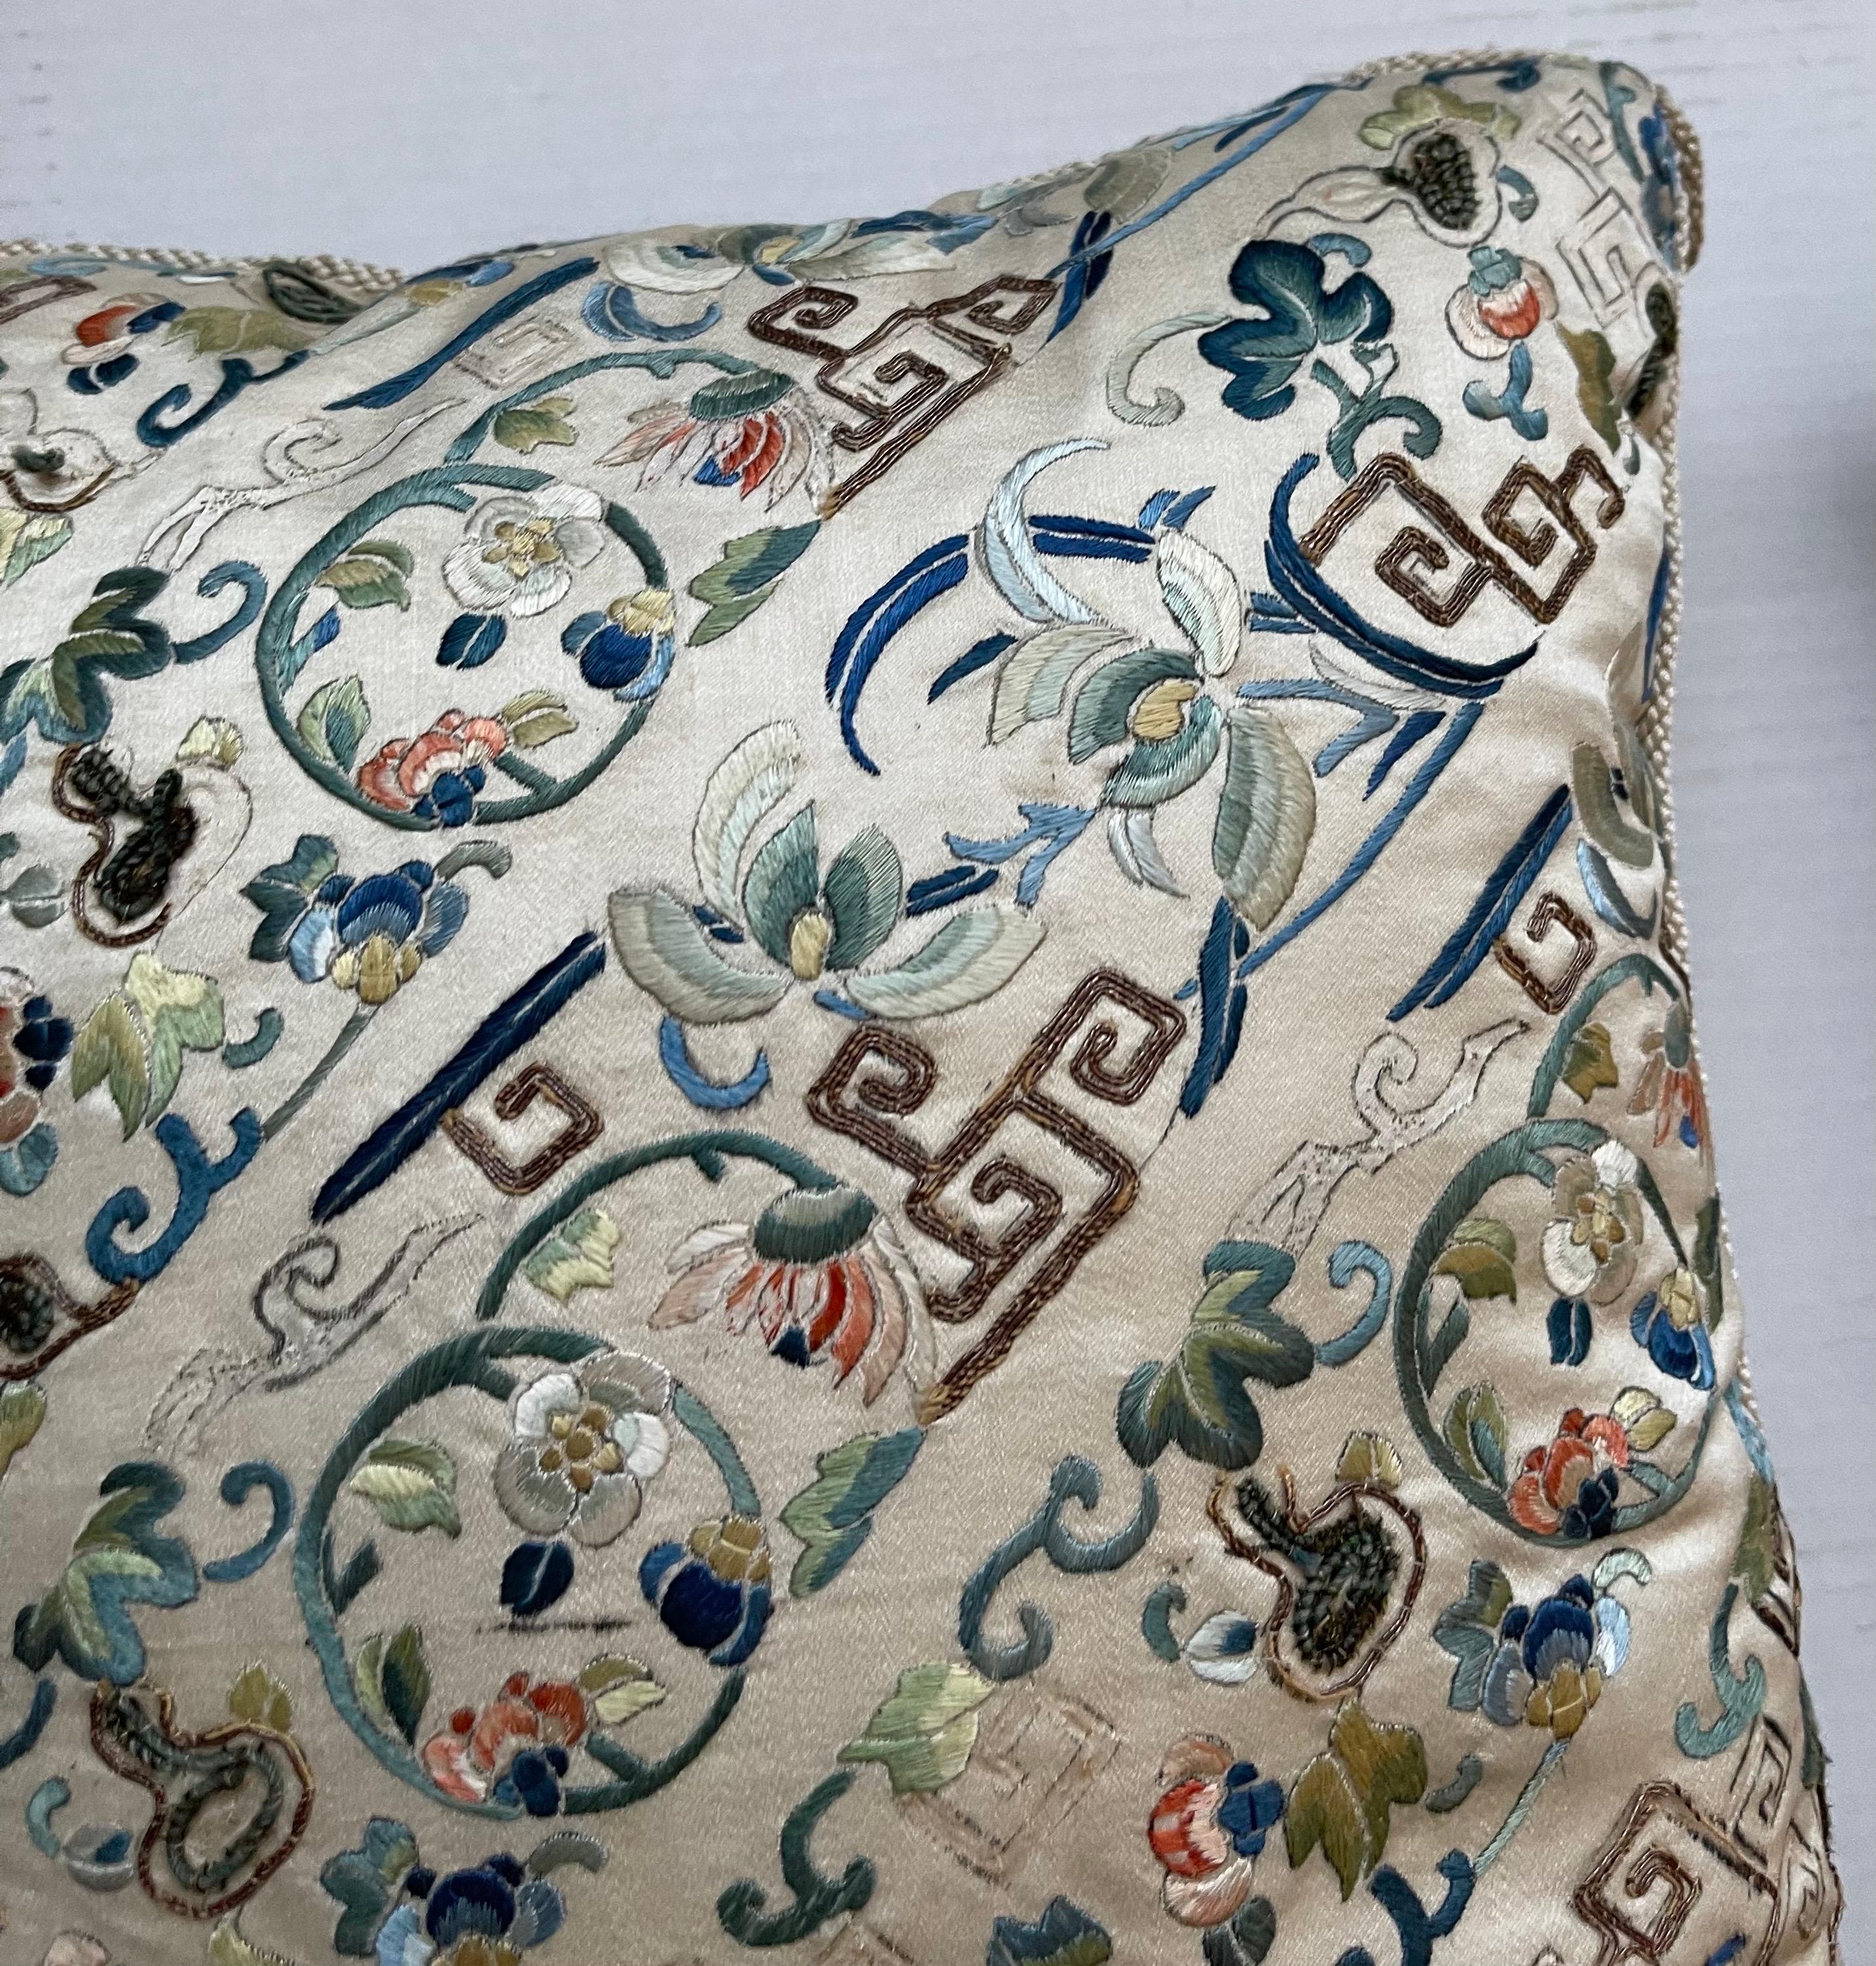 Pair of Antique Chinese Embroidered Silk Textile Pillows 1